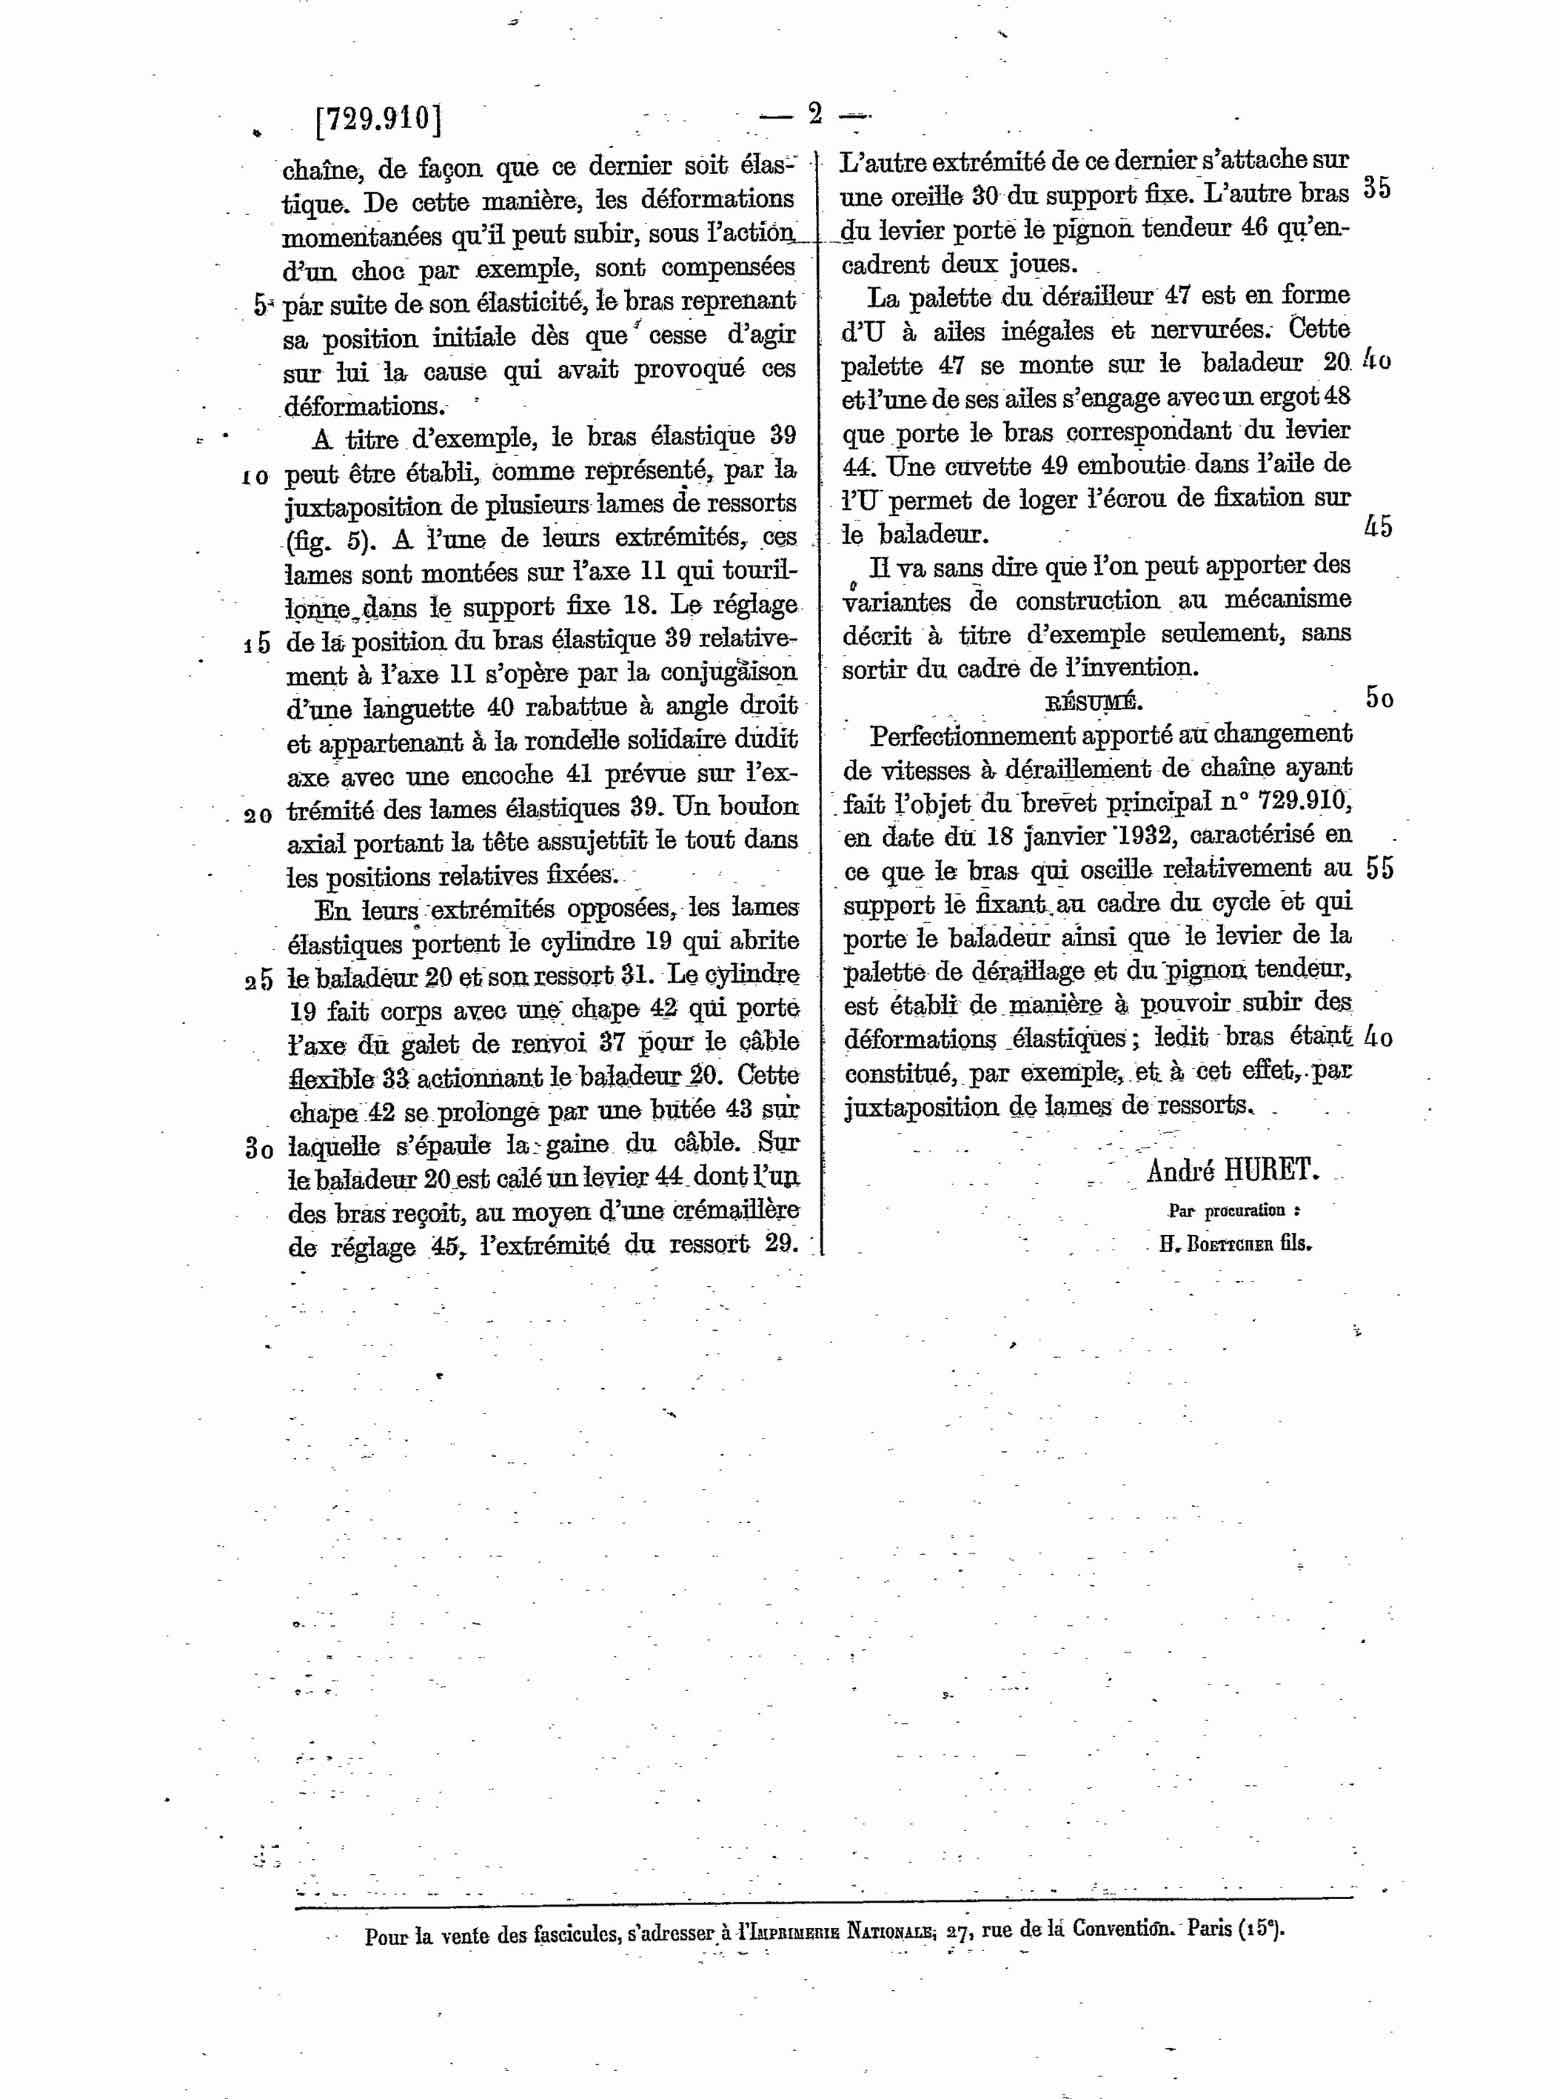 French Patent 729,910 addition 44,390 - Huret scan 2 main image